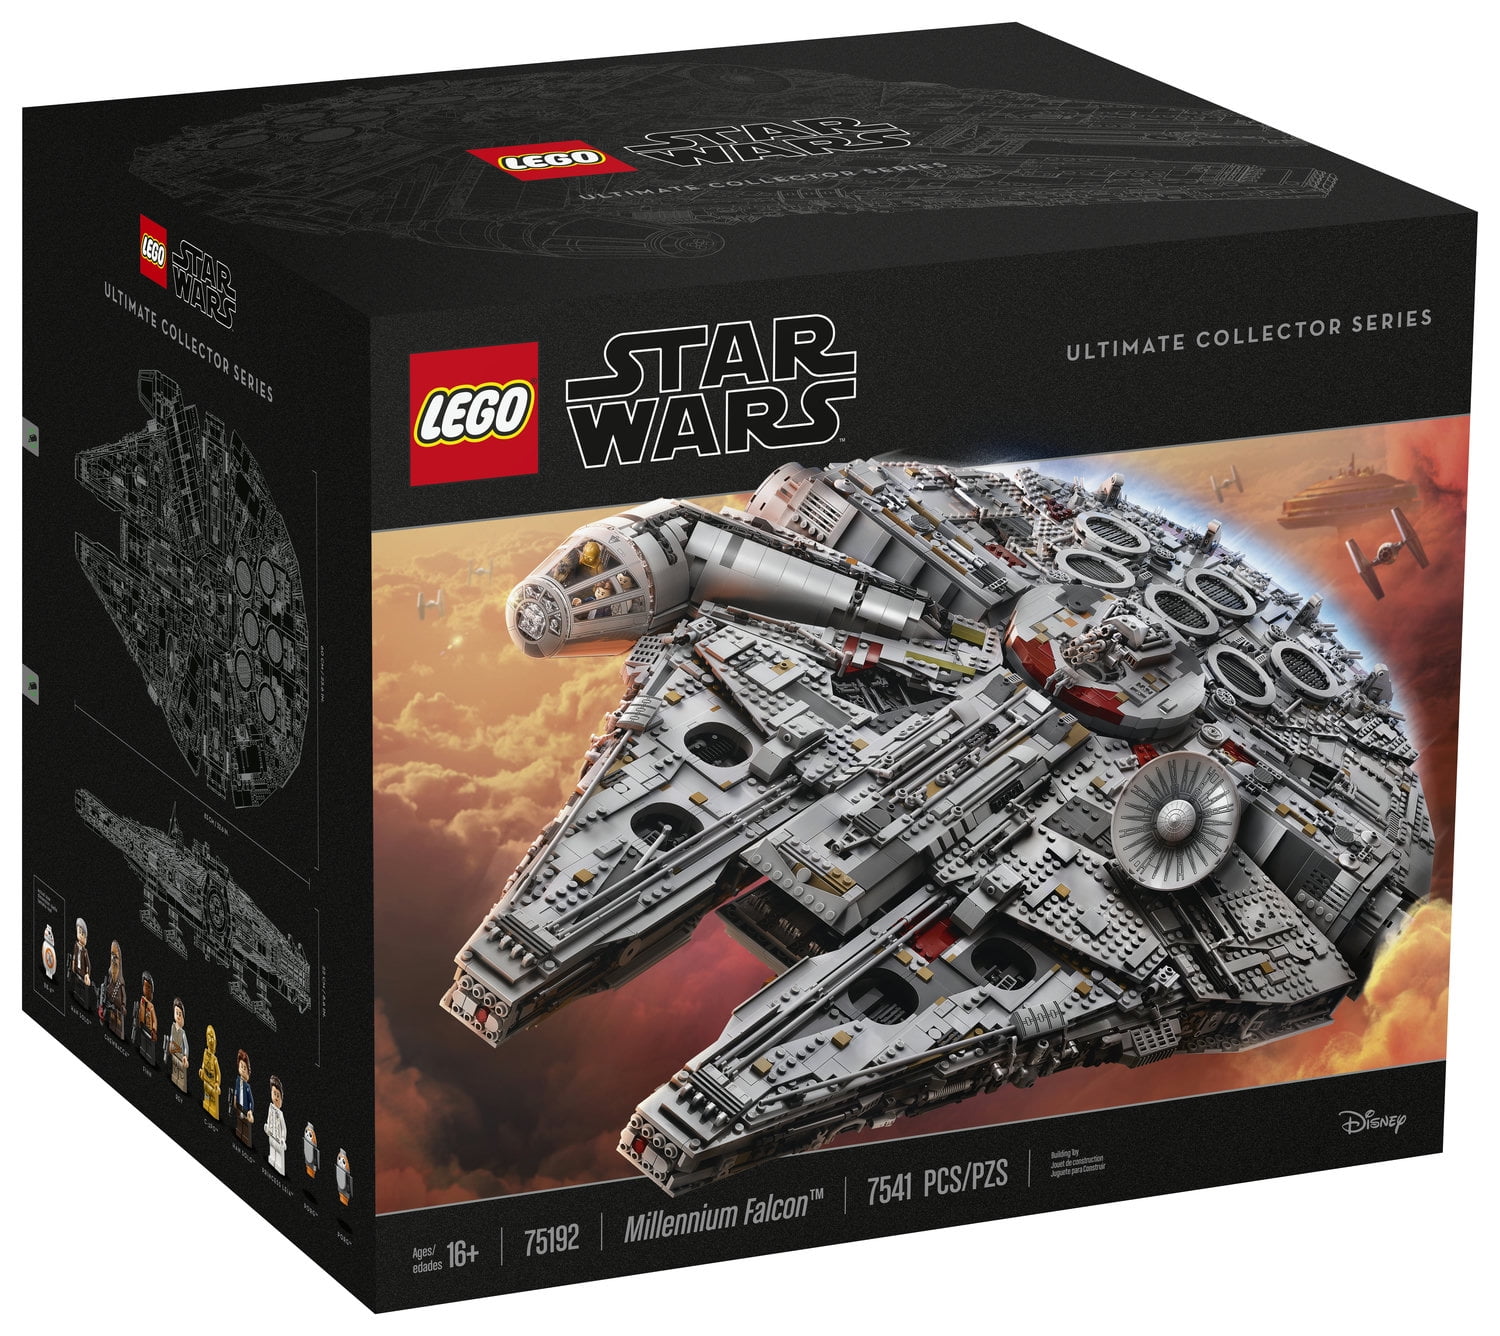 koncept Hej hej bred LEGO Star Wars Ultimate Millennium Falcon 75192 Expert Building Set and  Starship Model Kit, Movie Collectible, Featuring Han Solo's Iconic Ship -  Walmart.com